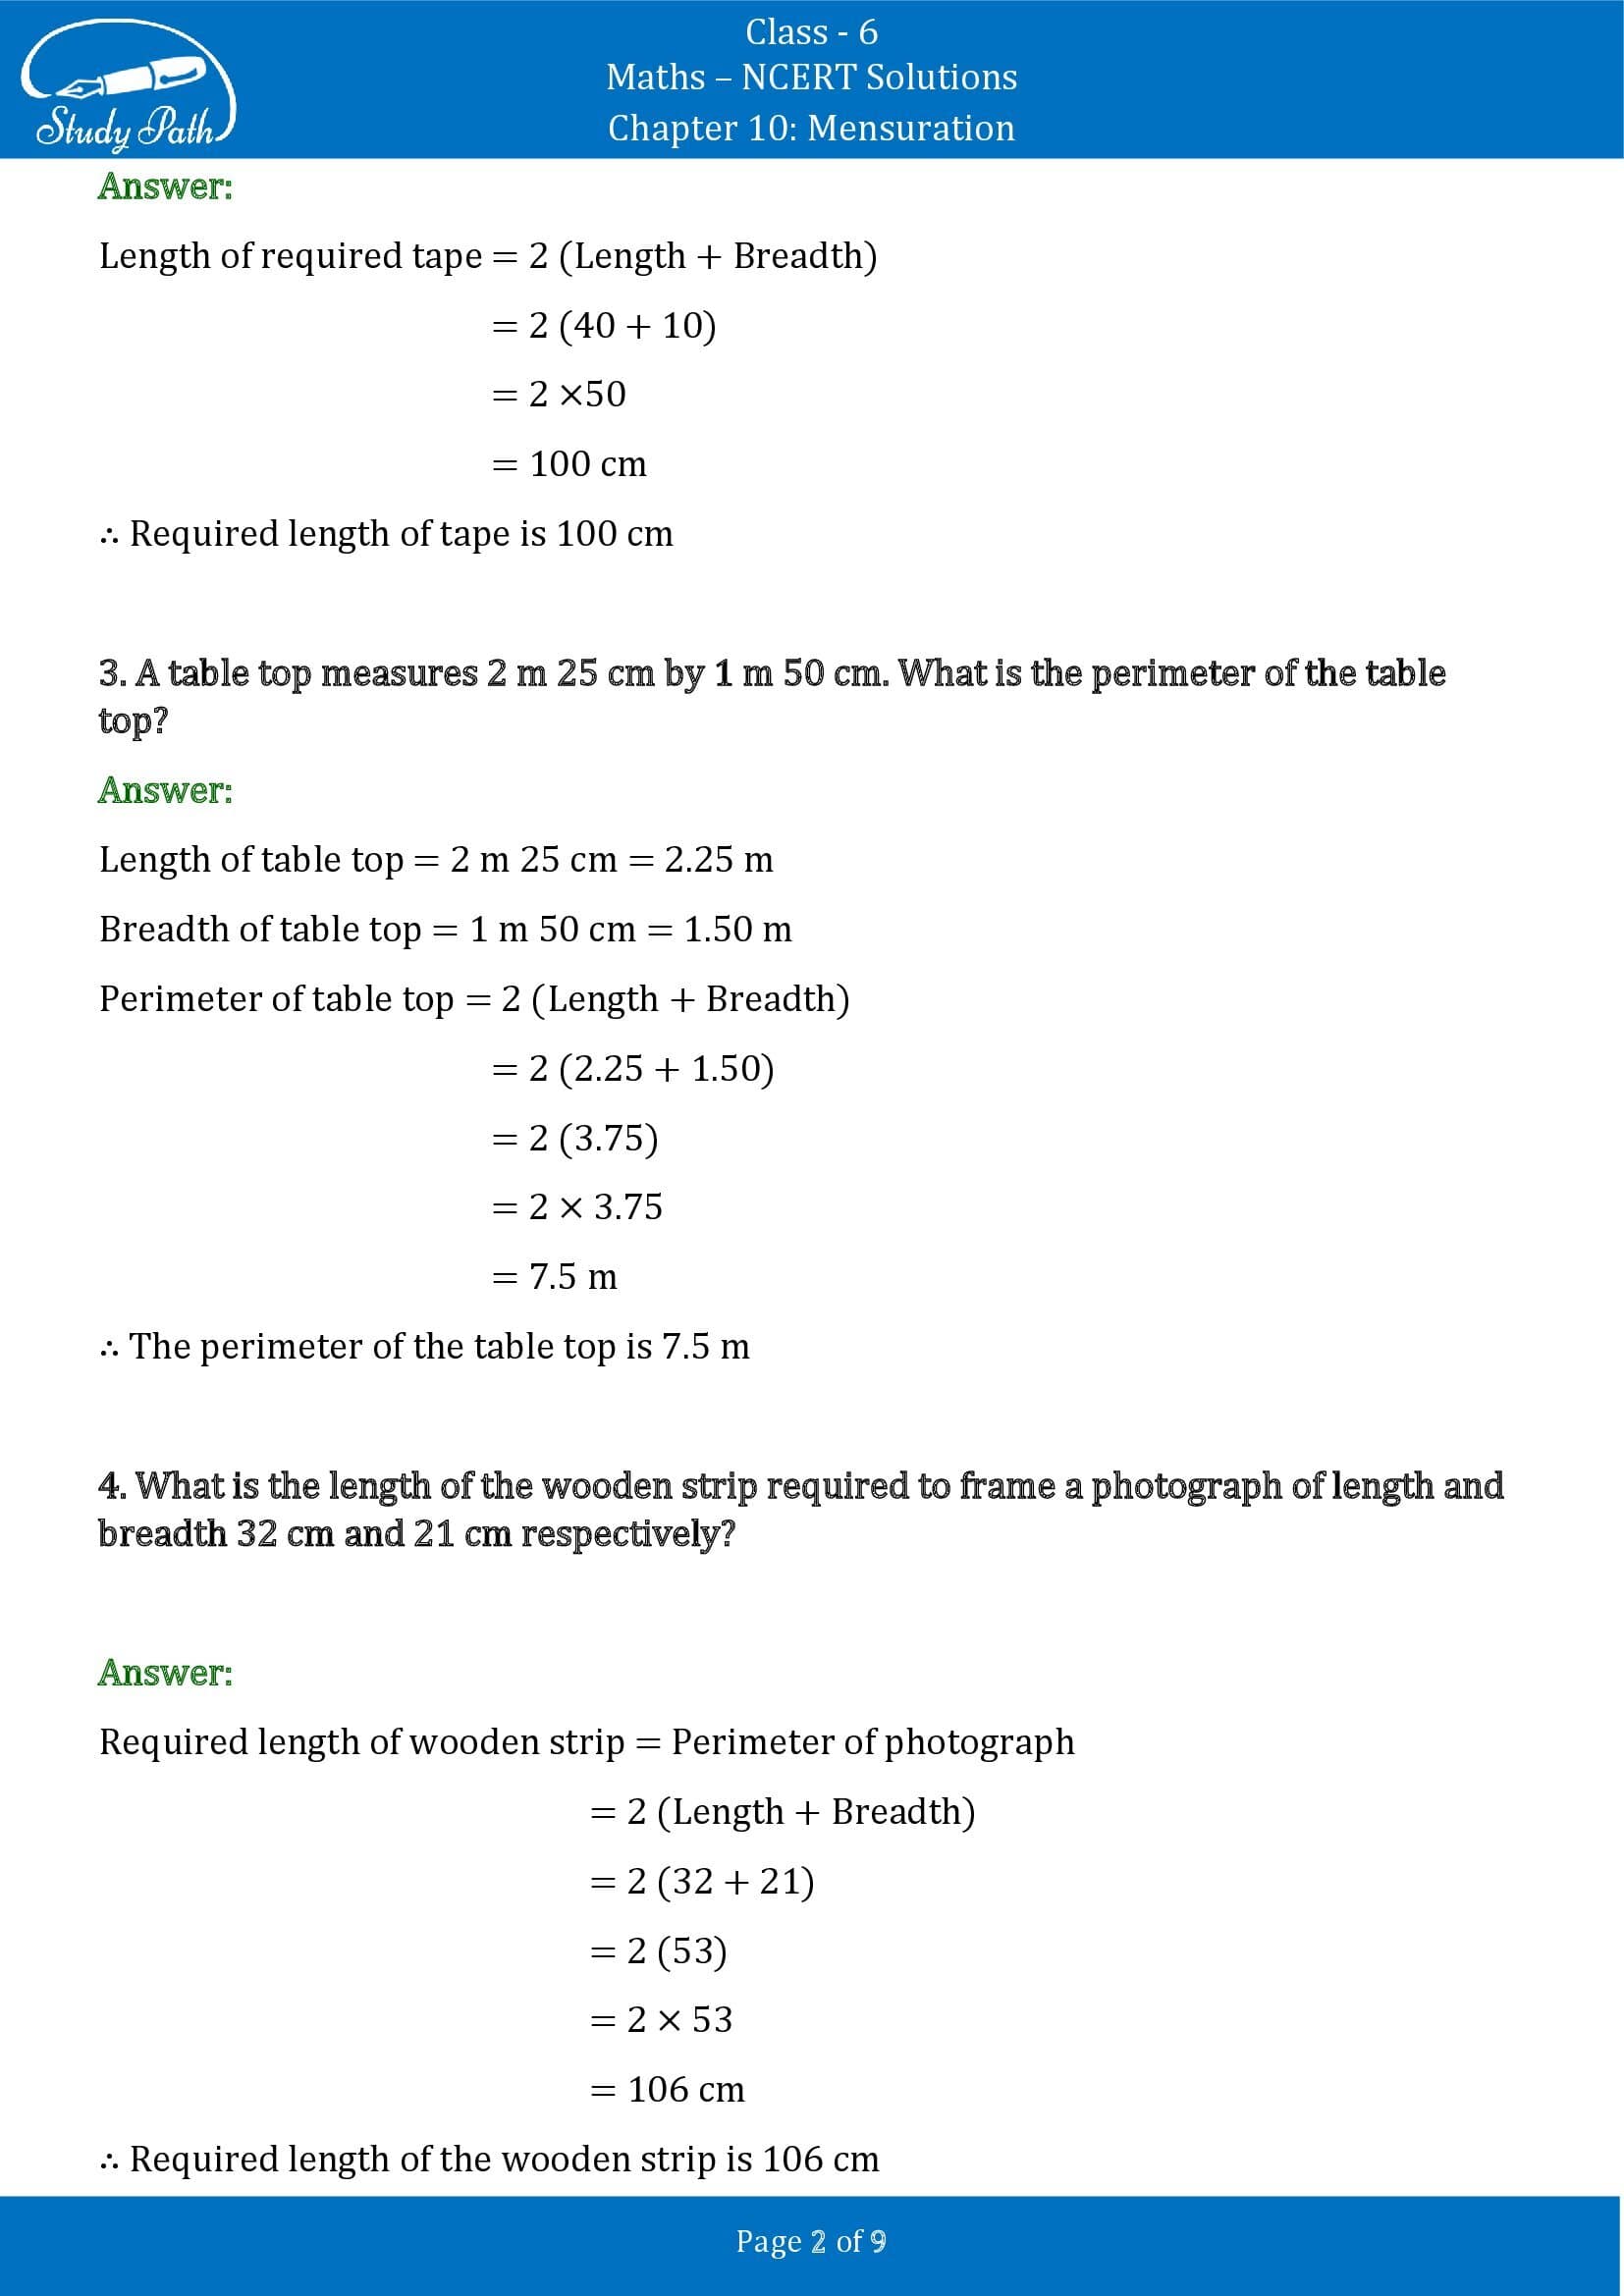 NCERT Solutions for Class 6 Maths Chapter 10 Mensuration Exercise 10.1 00002